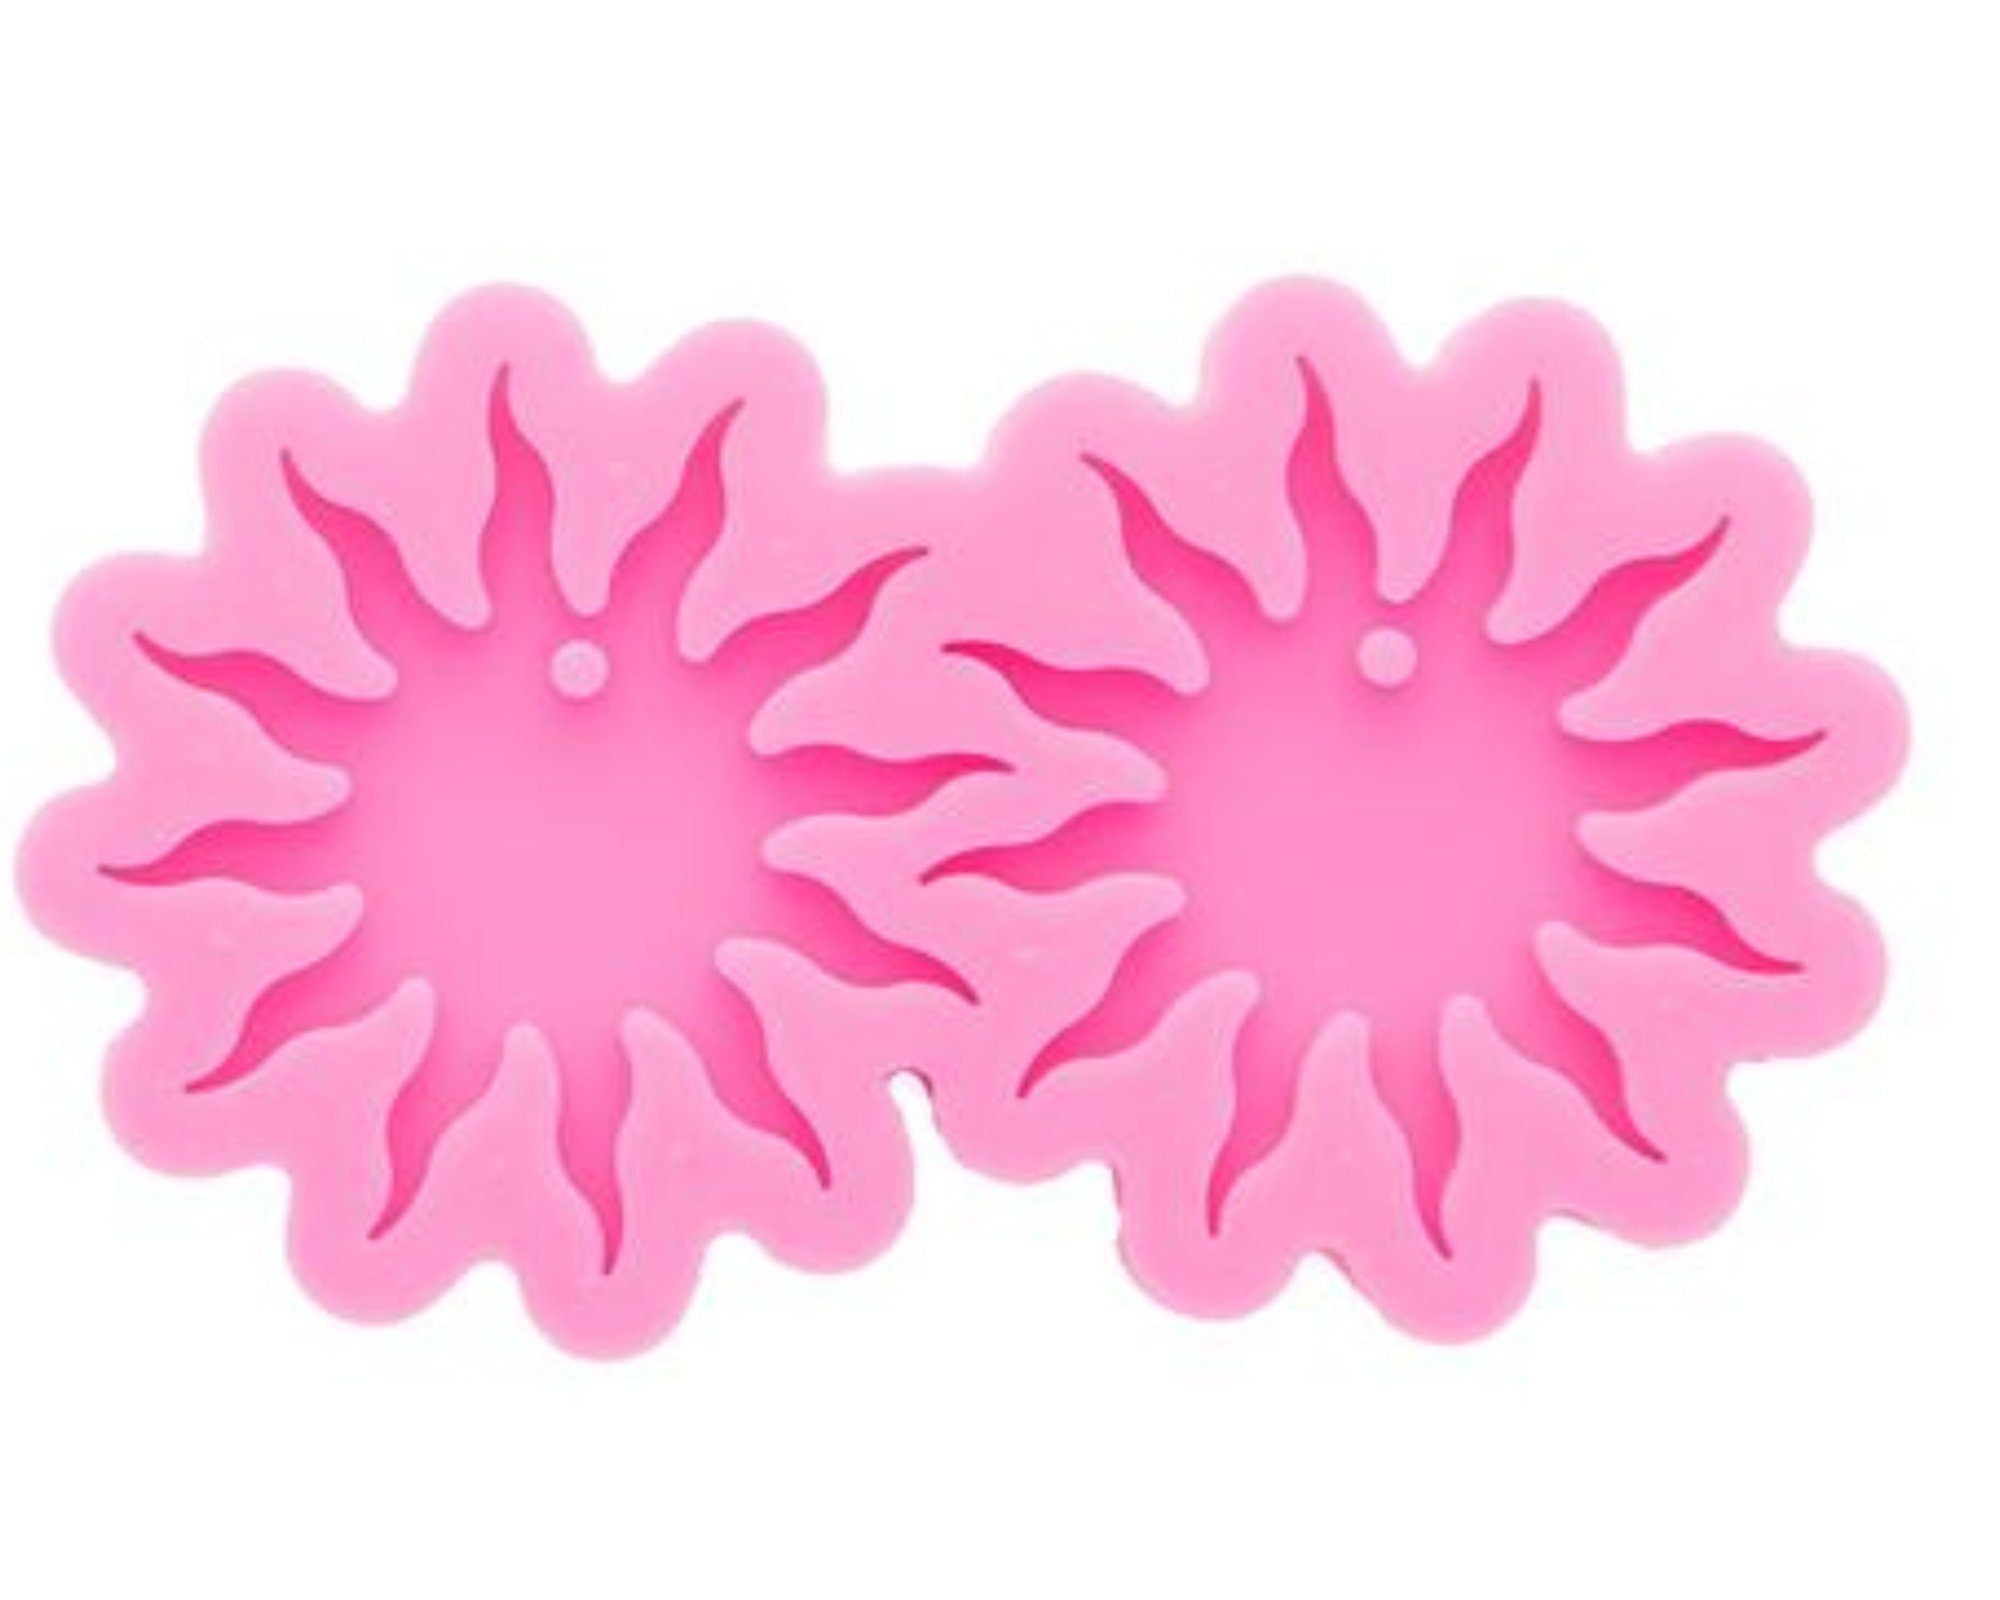 1pc flower sun earring mould, dangle drop mold, shiny Silicone mold, DIY Jewelry Making, epoxy Resin mould, Jewellery supplies australia